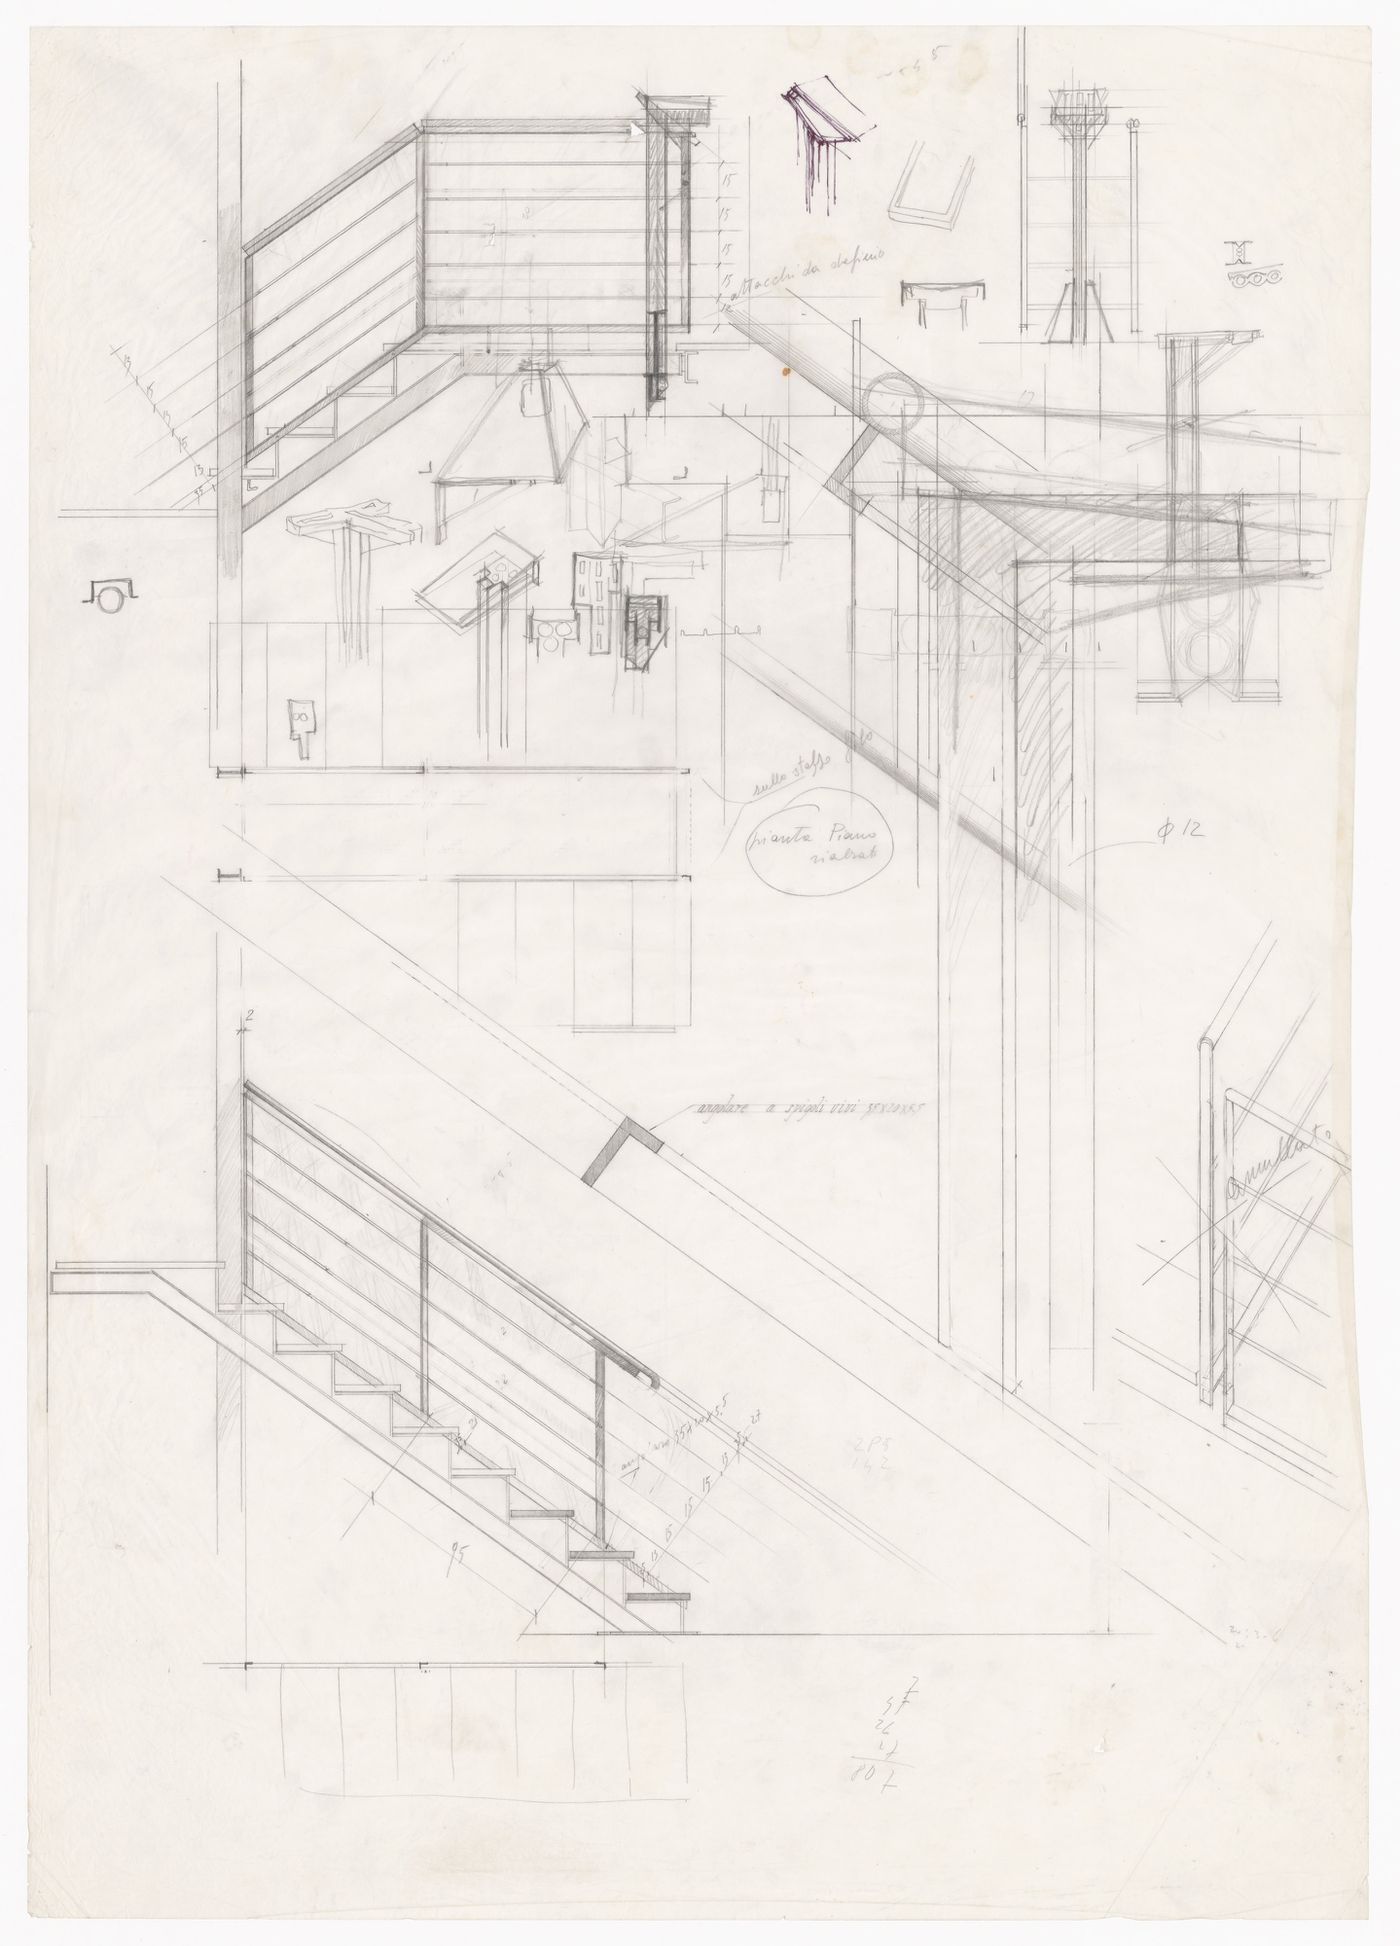 Elevations, sections and details for Casa Frea, Milan, Italy